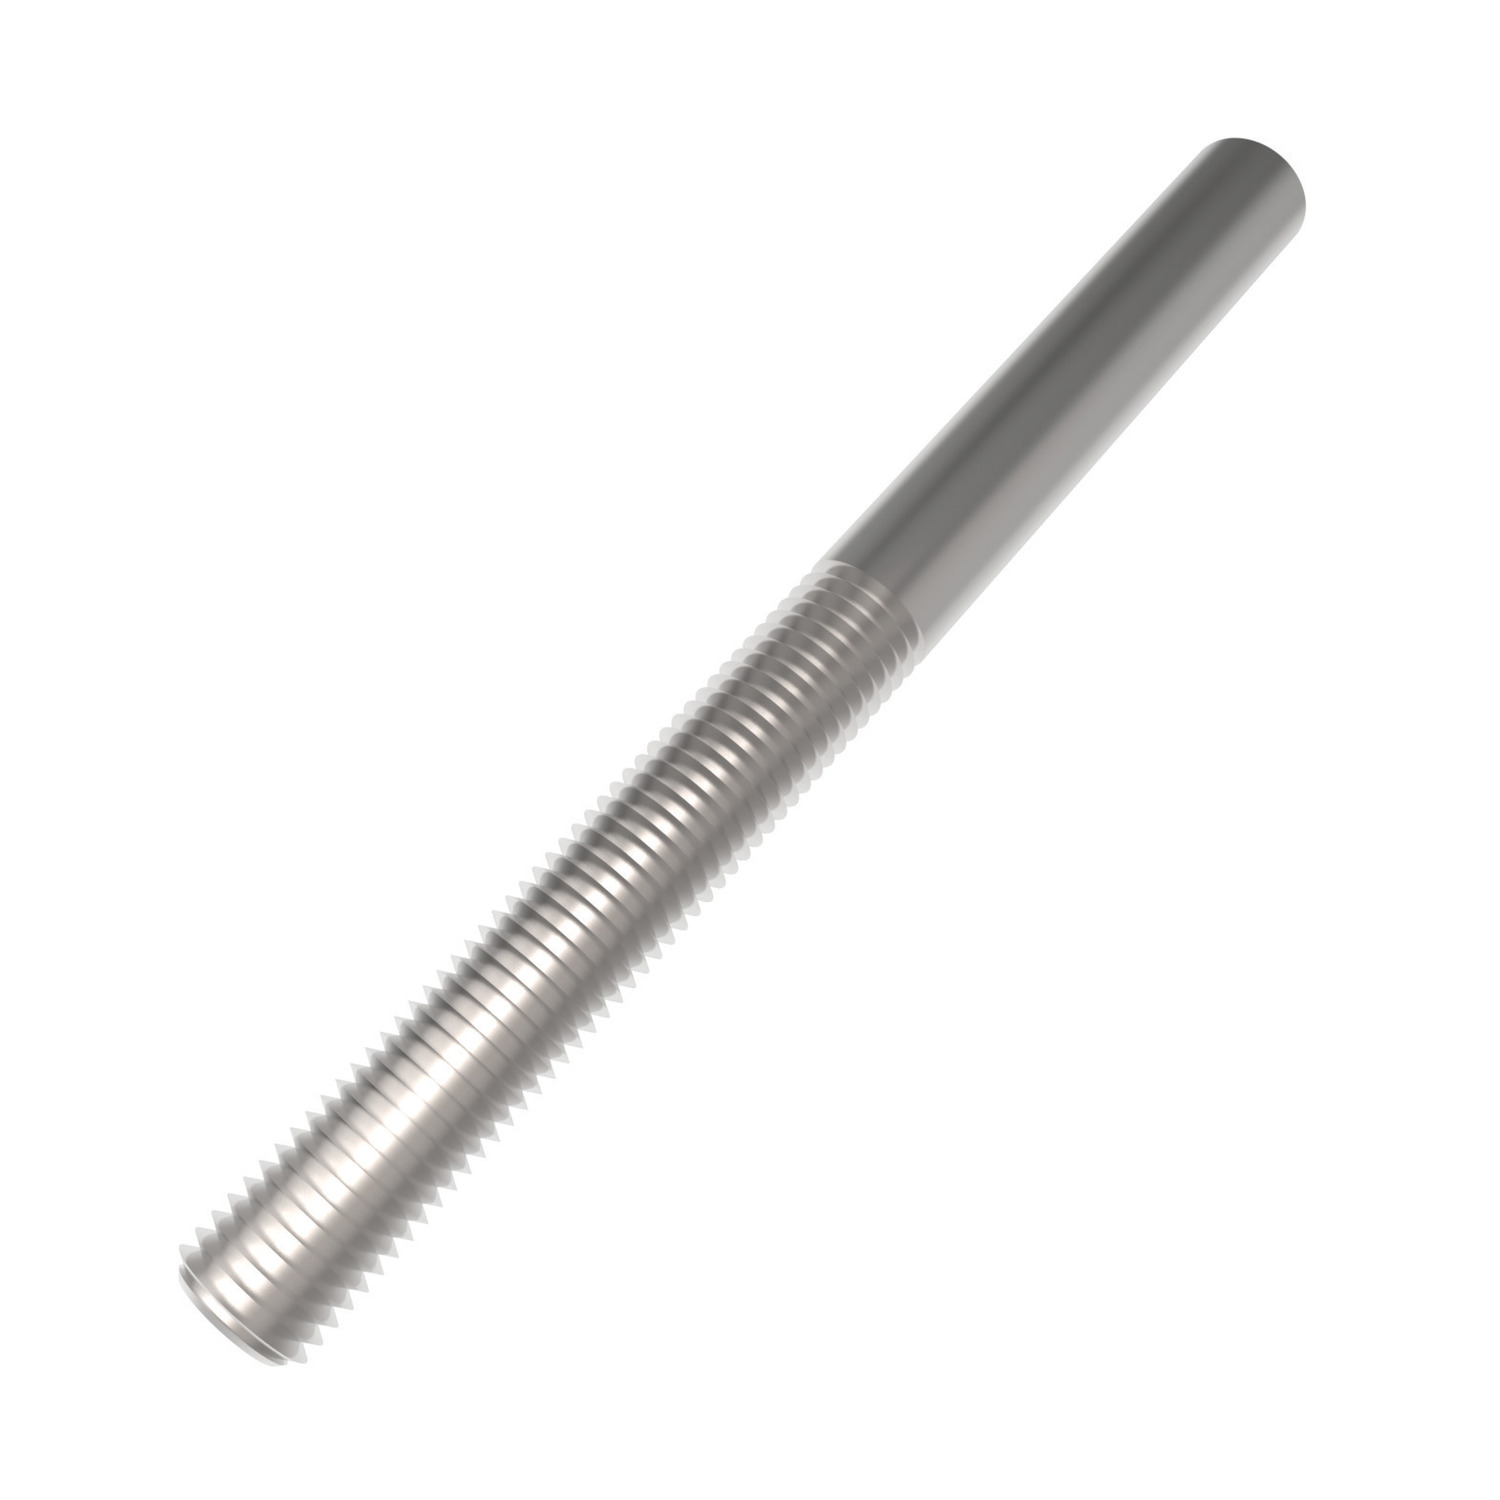 R3866.R014-ZP Welding Studs steel RH M14 Not to be used for lifting unless SWL marked.